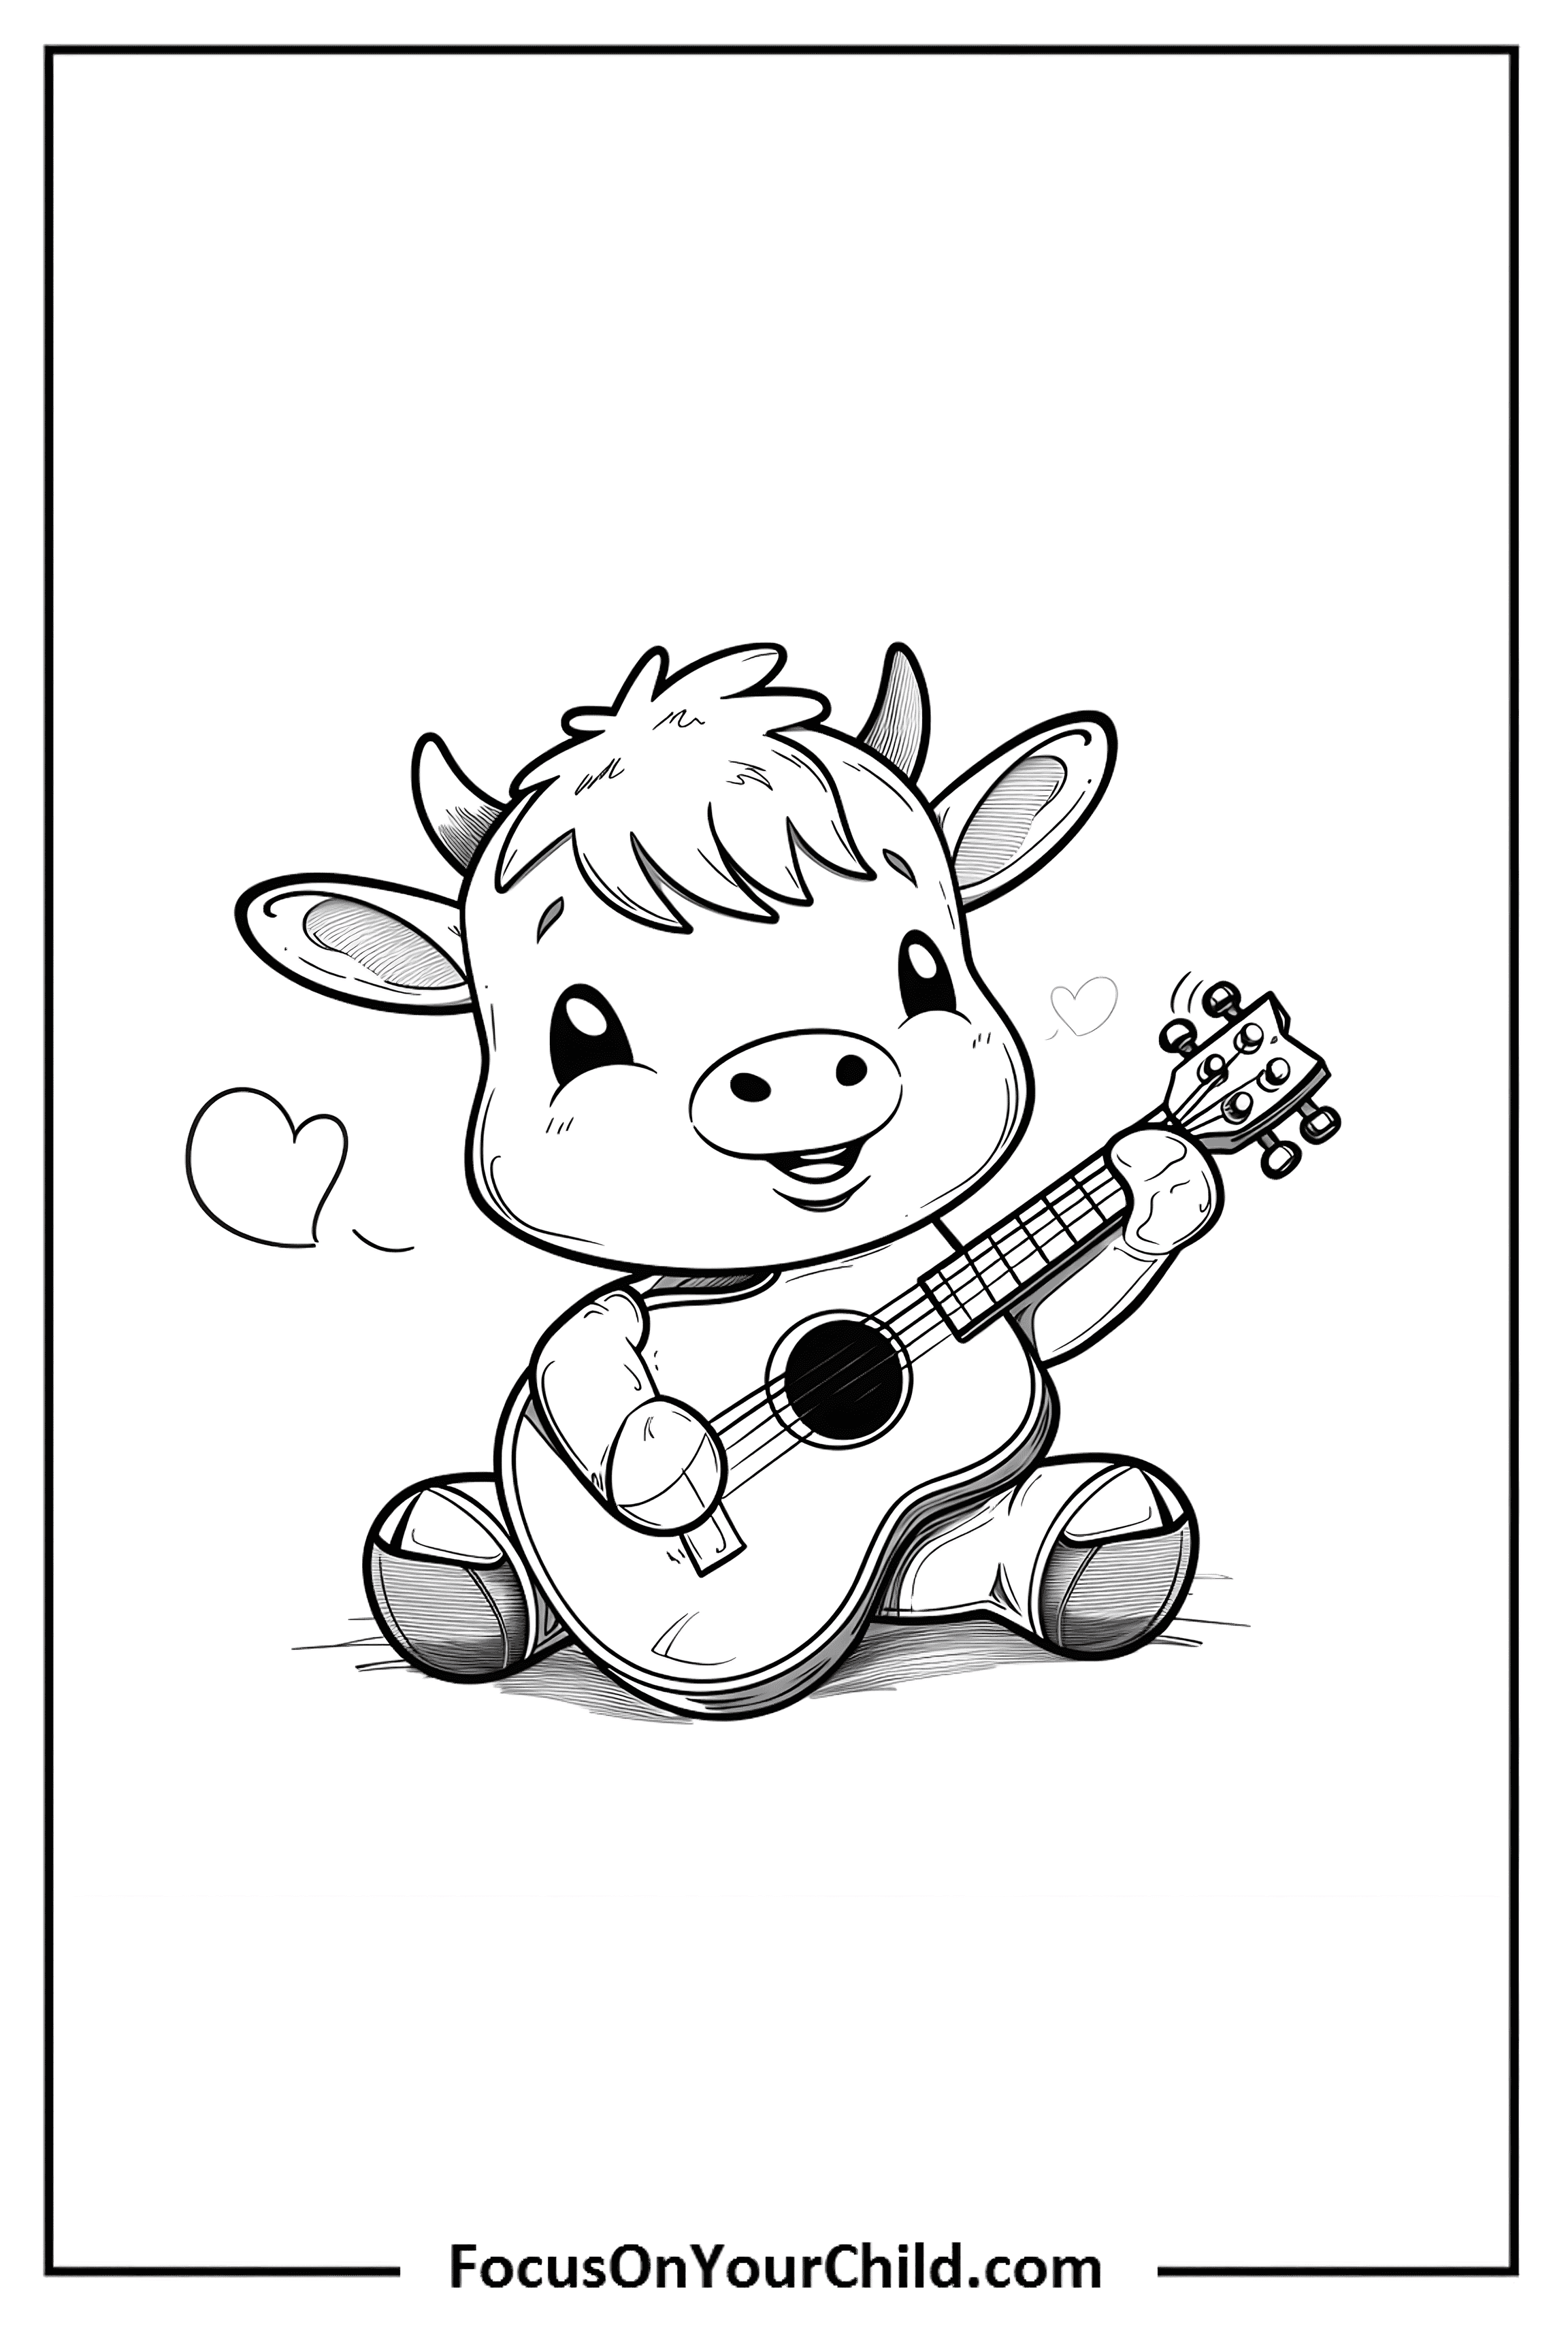 Charming cartoon cow playing guitar in black-and-white illustration.